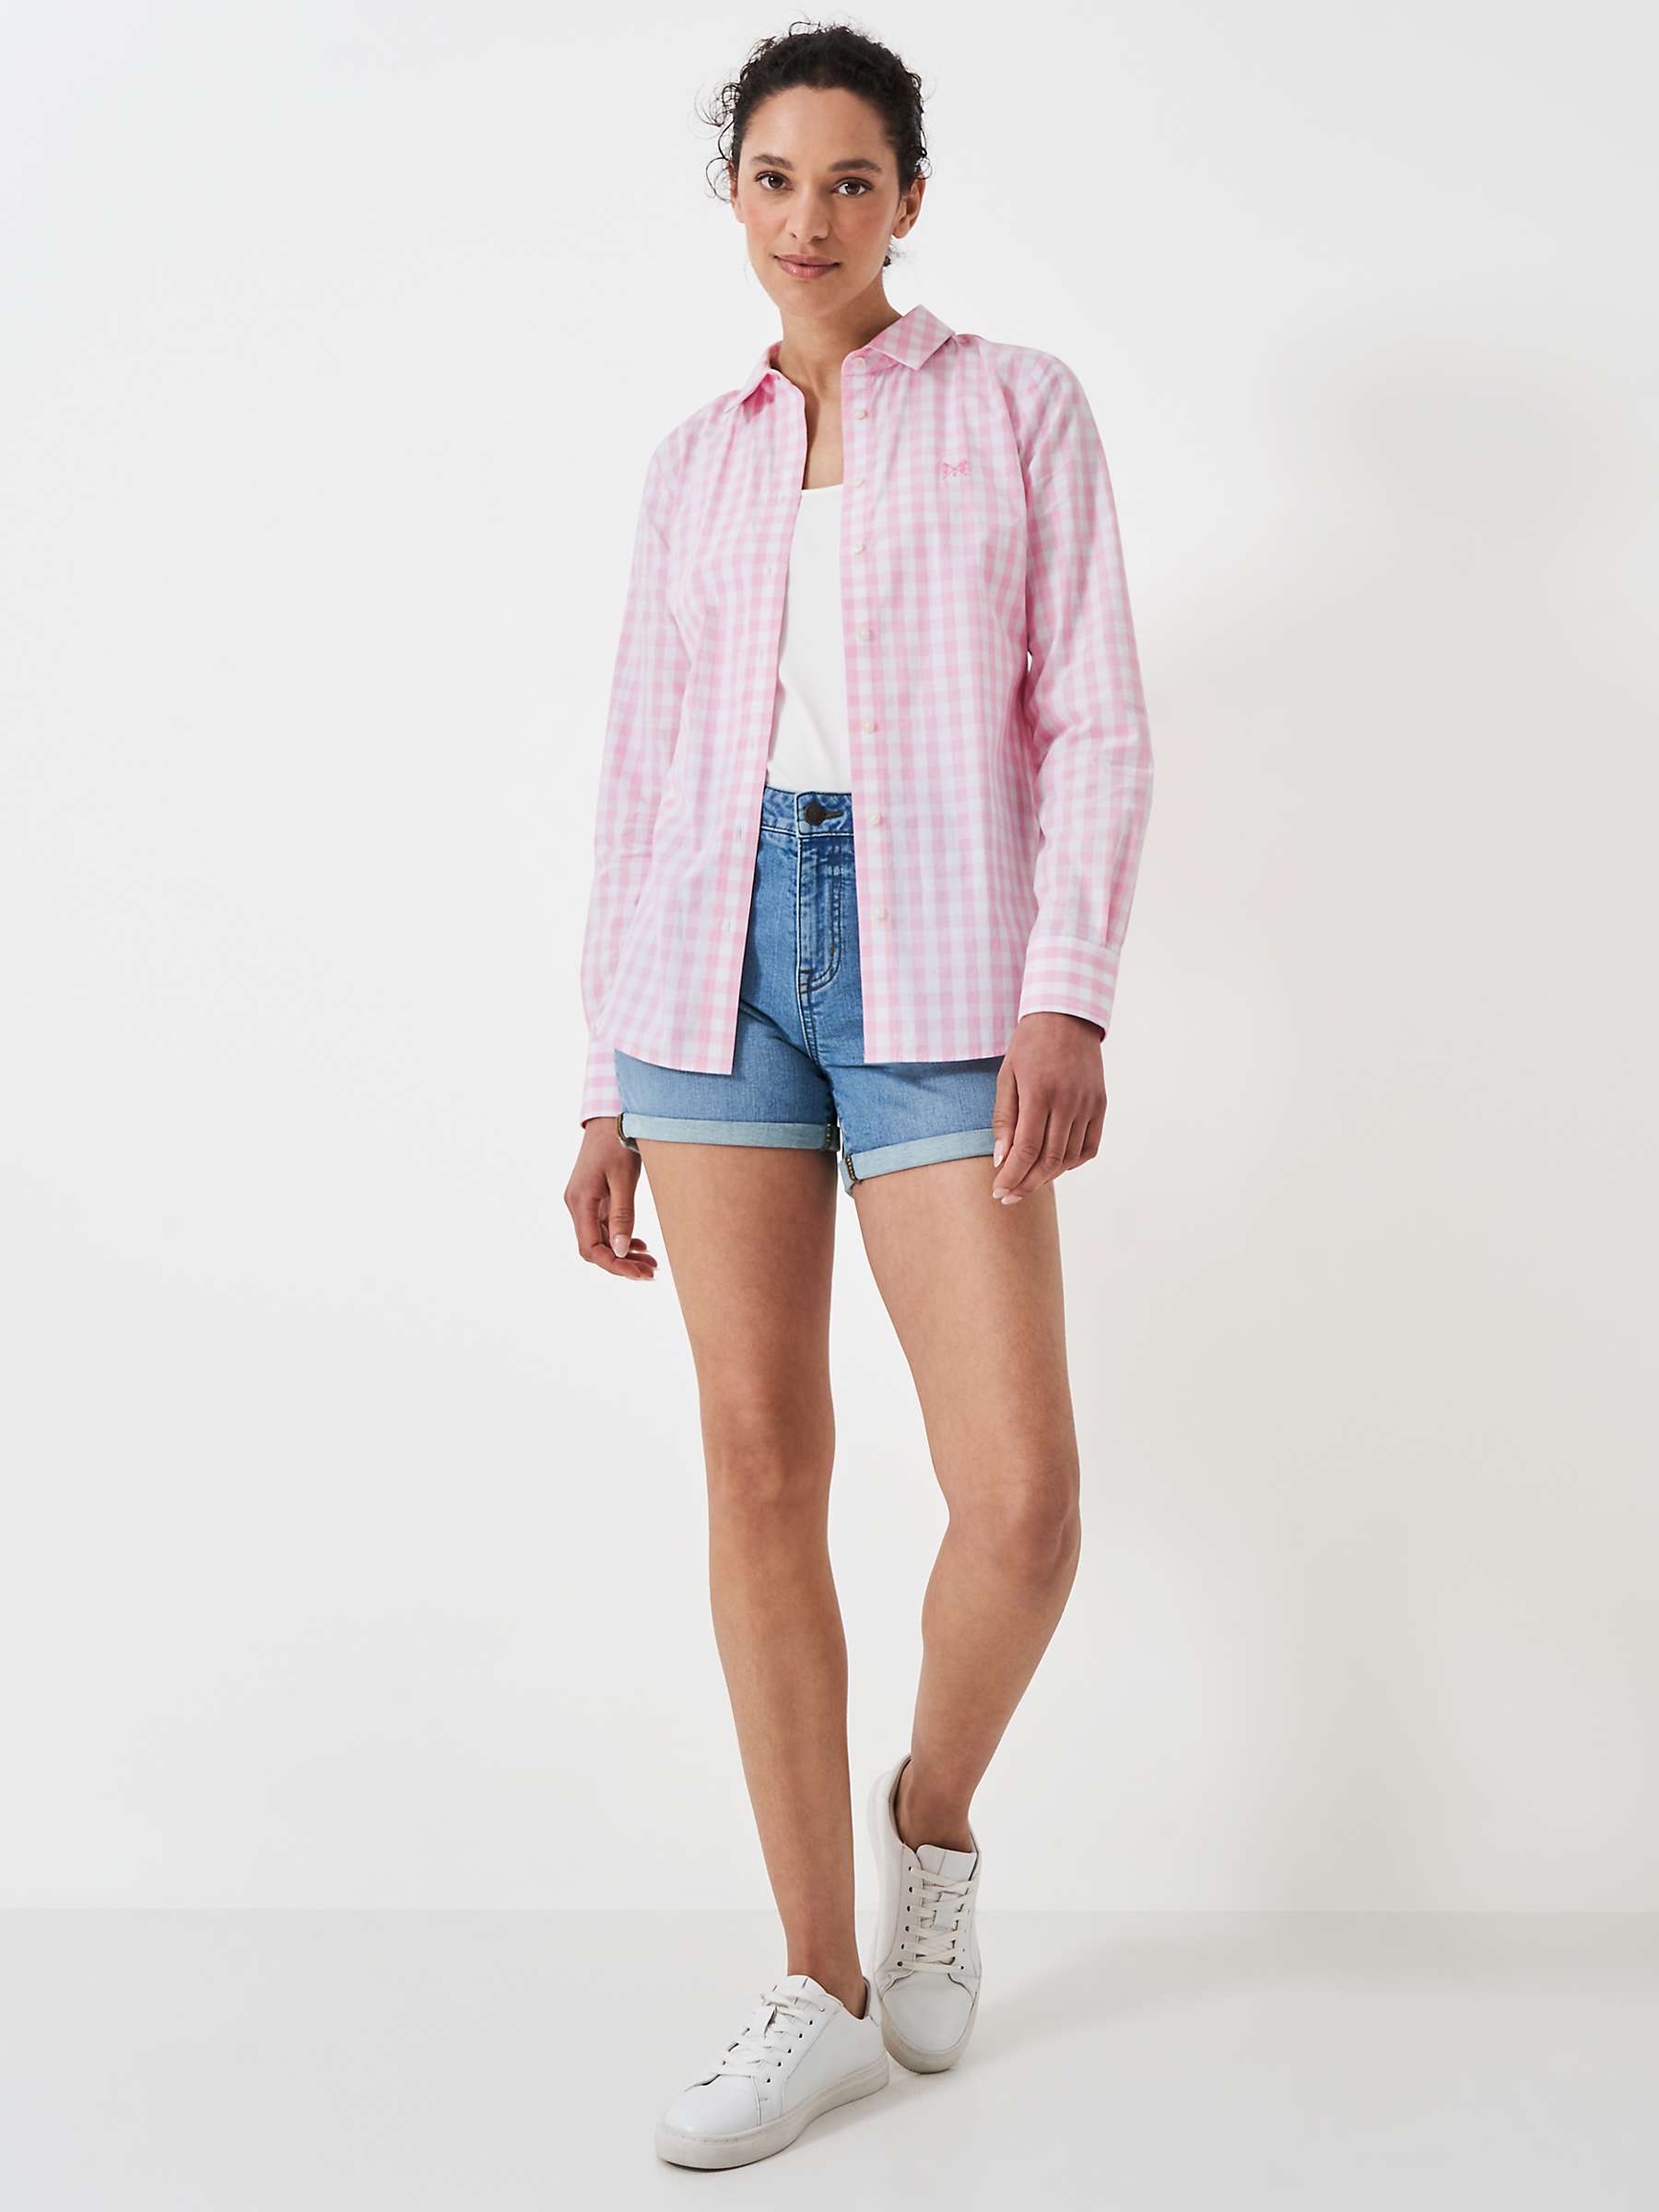 Buy Crew Clothing Classic Fit Gingham Shirt, Light Pink Online at johnlewis.com